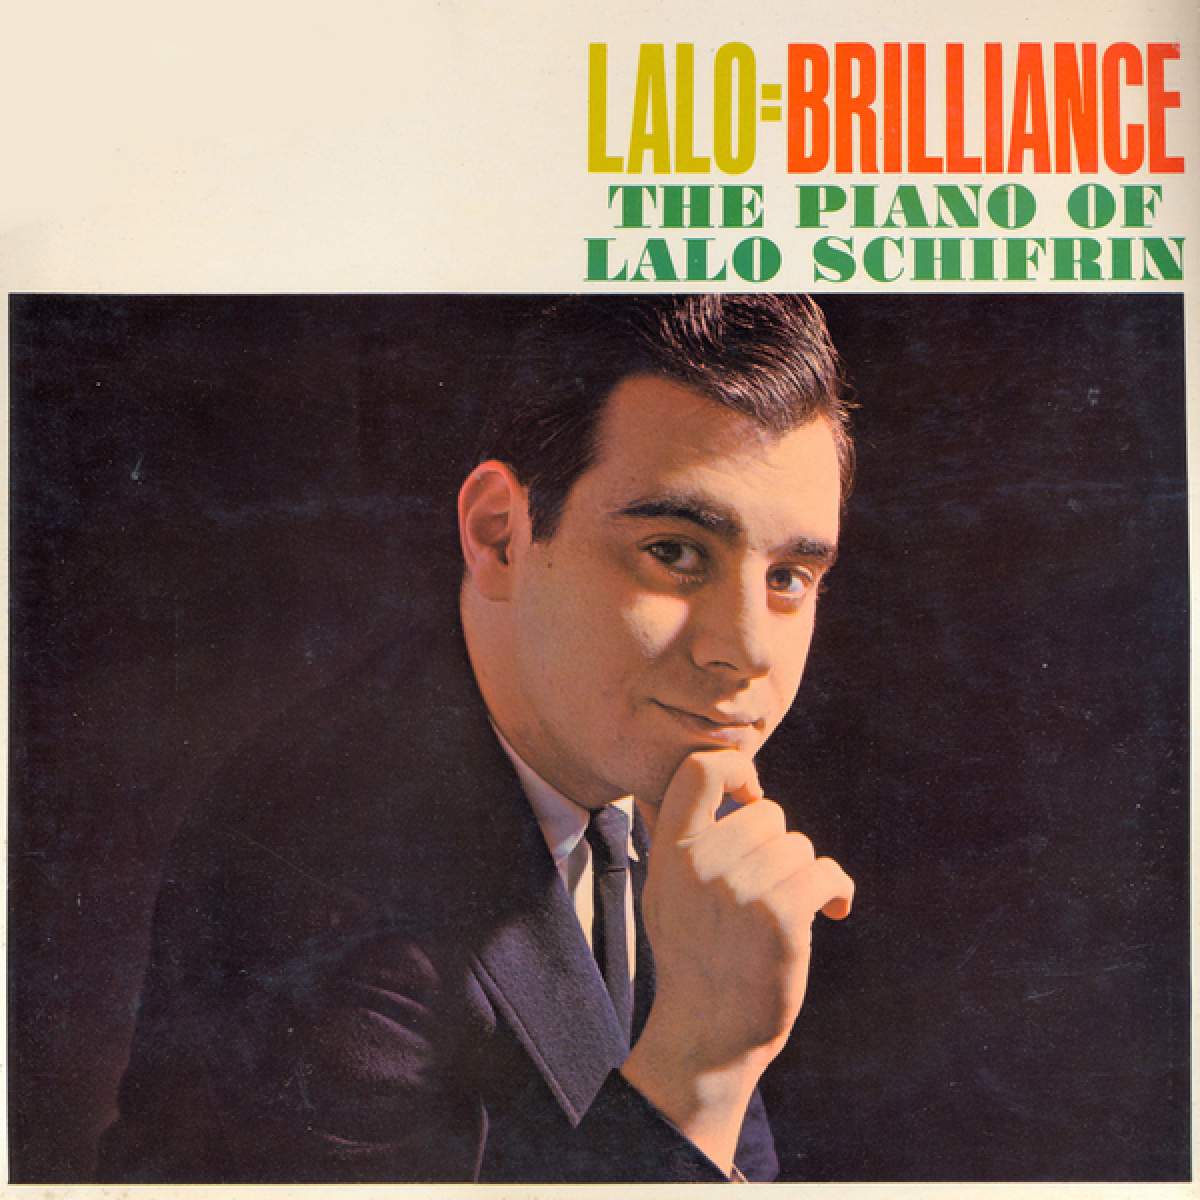 lalo schifrin on an album cover